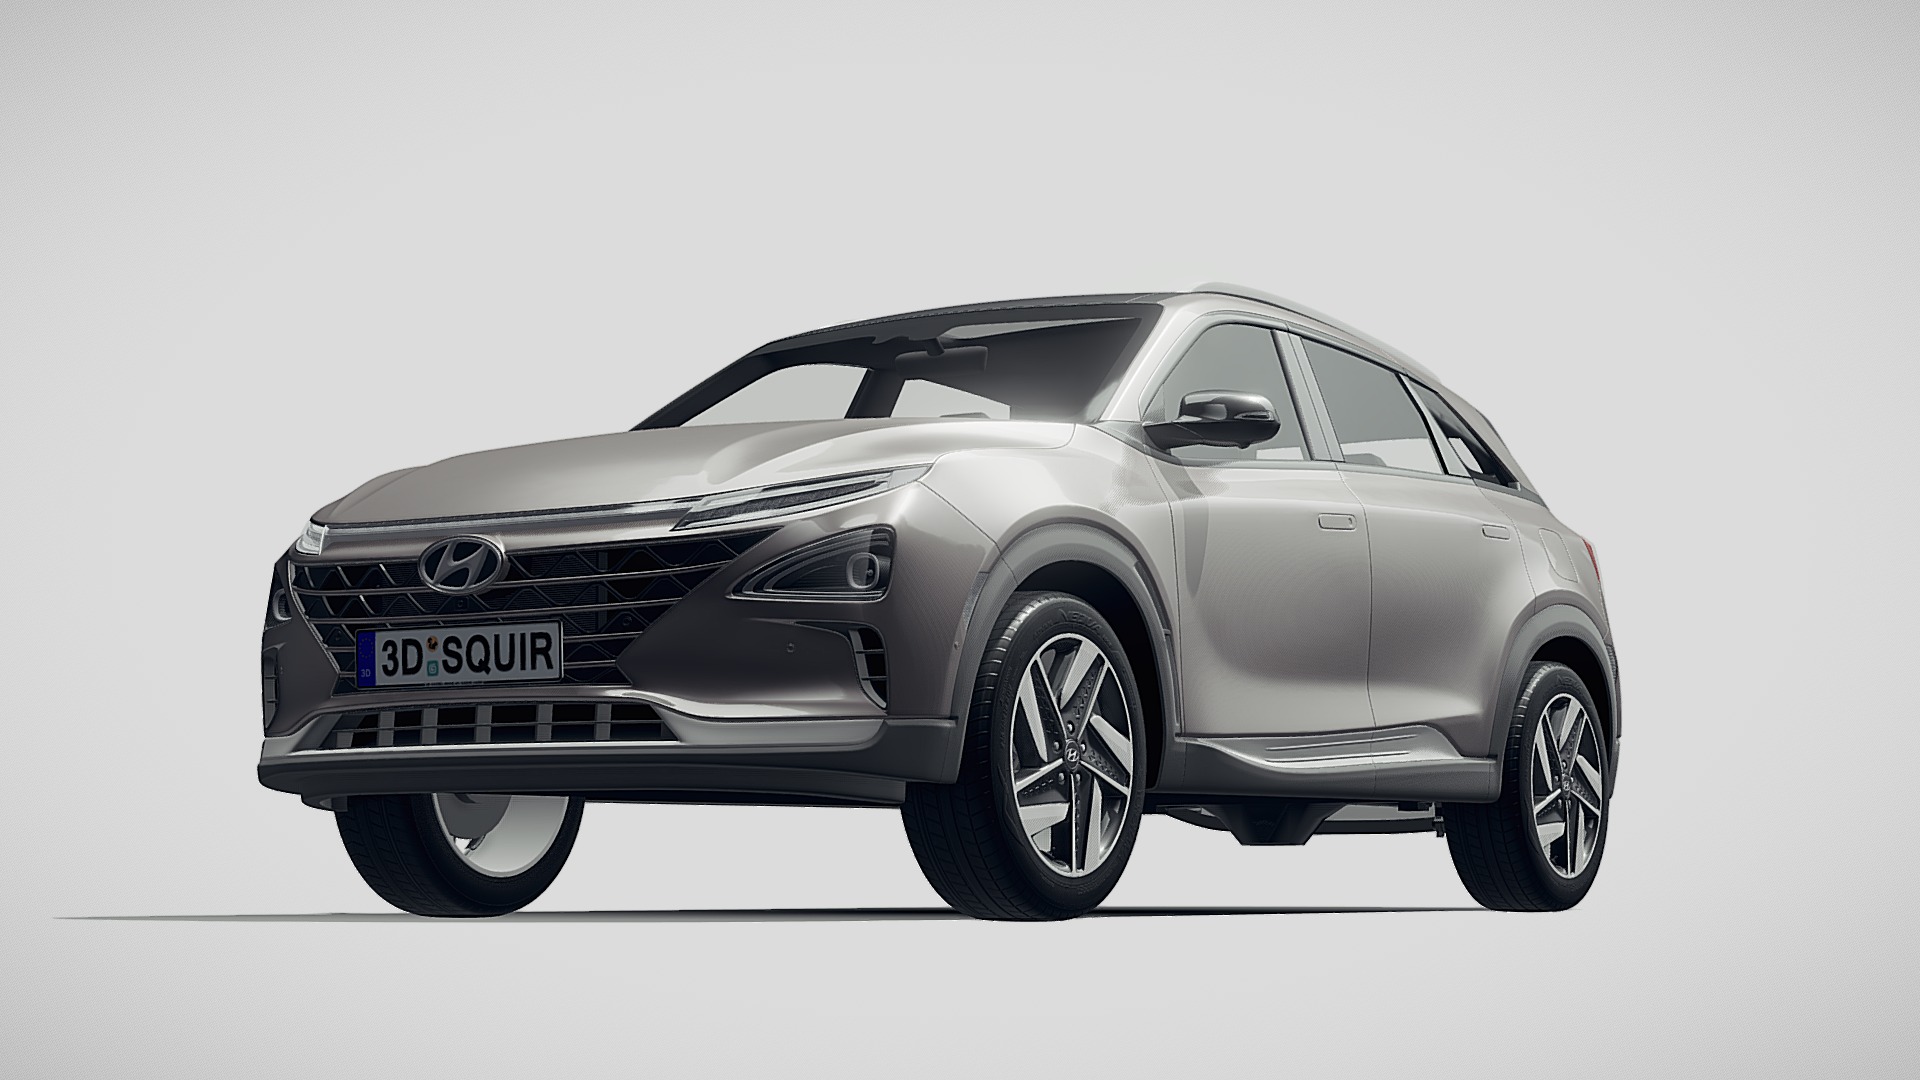 3D model Hyundai Nexo 2019 - This is a 3D model of the Hyundai Nexo 2019. The 3D model is about a silver car with a black top.